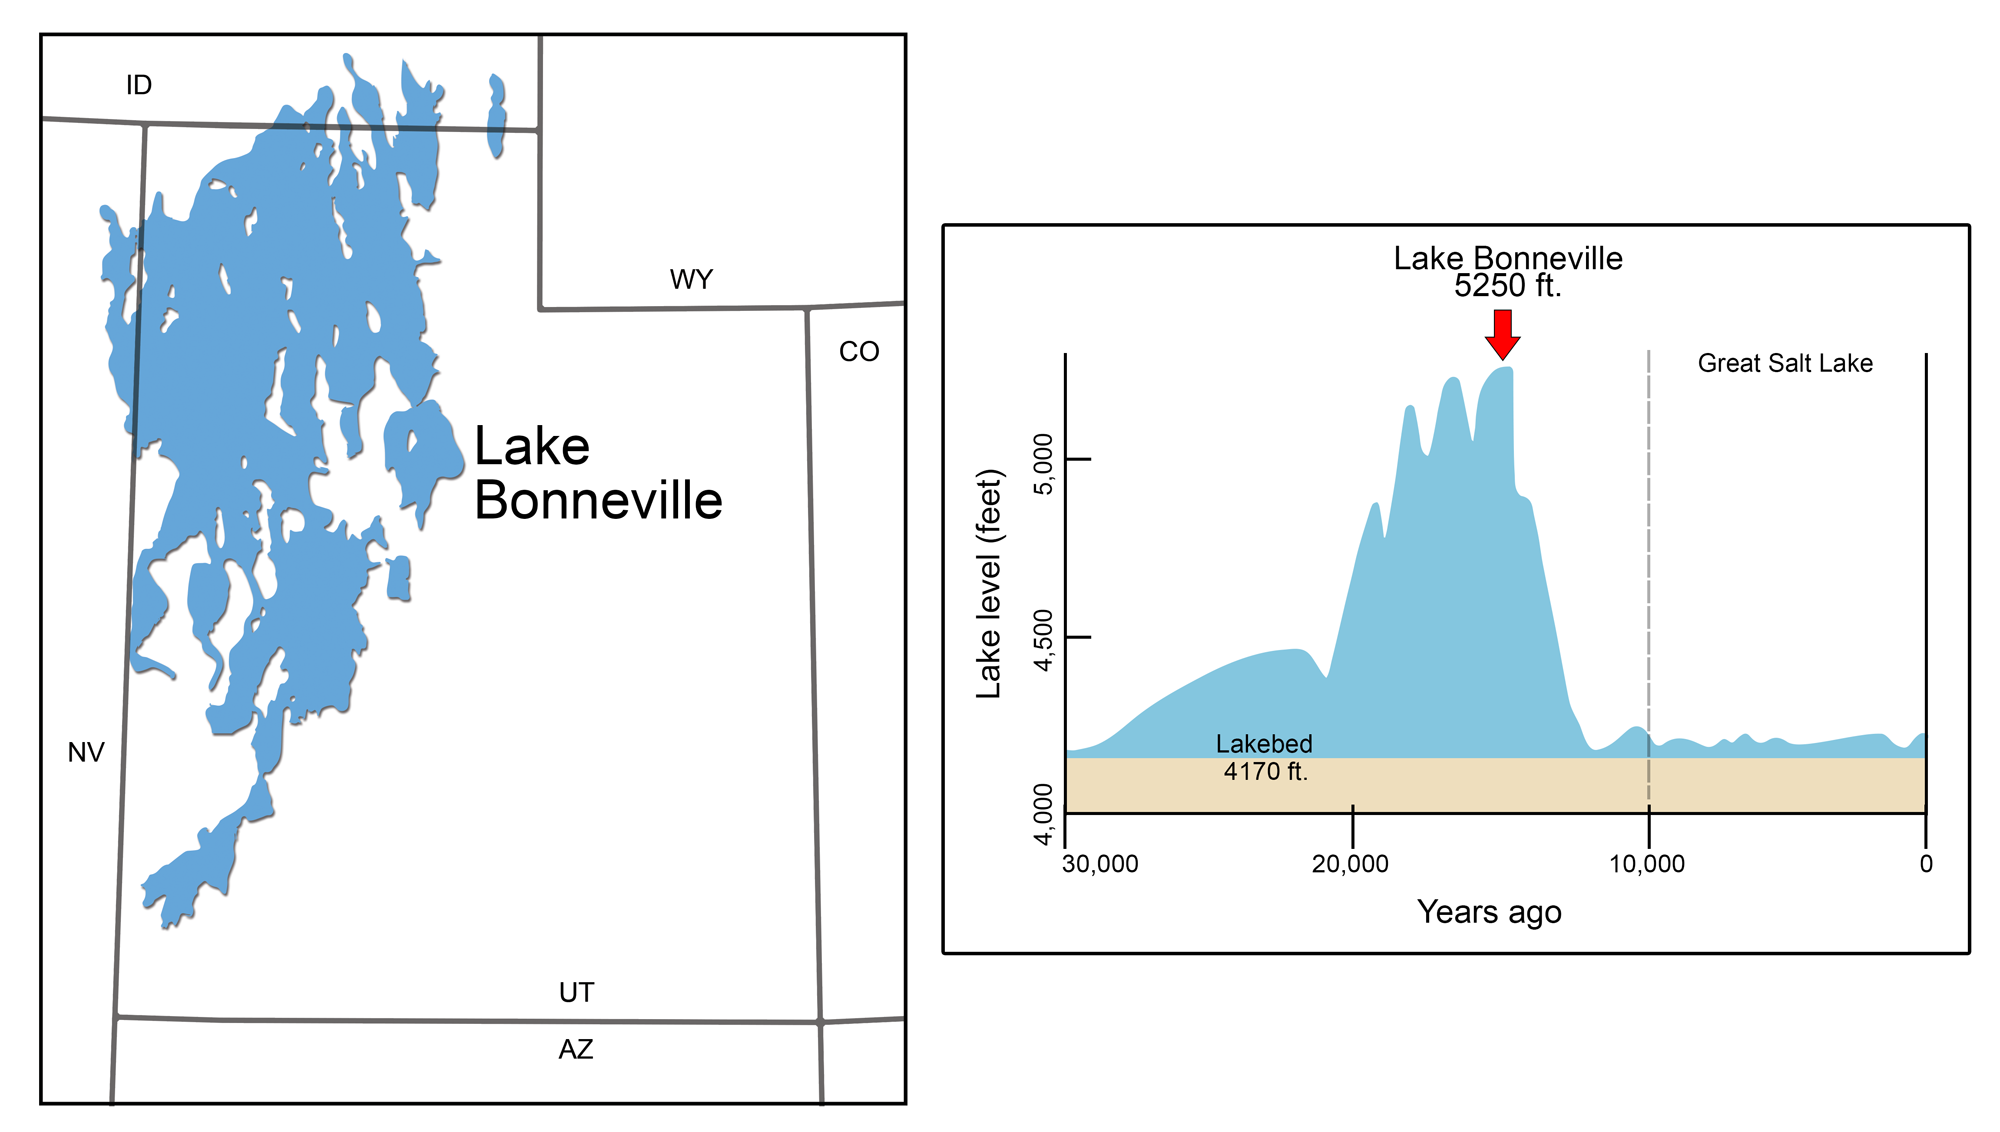 2-Panel image of ancient Lake Bonneville. Left: Map of Lake Bonneville at its greatest surface area in the Pleistocene. The lake extends almost the entire length of western Utah and is widest in the north, narrowing toward the south. Panel 2: Graph showing fluctuating lake levels of ancient Lake Bonneville. The lake reached its peak a little less than 15,000 years ago at 5250 feet. Approaching 10,000 years ago, lake levels dropped precipitously and have stayed low since. The lake is called the Great Salt Lake beginning about 10,000 years ago.